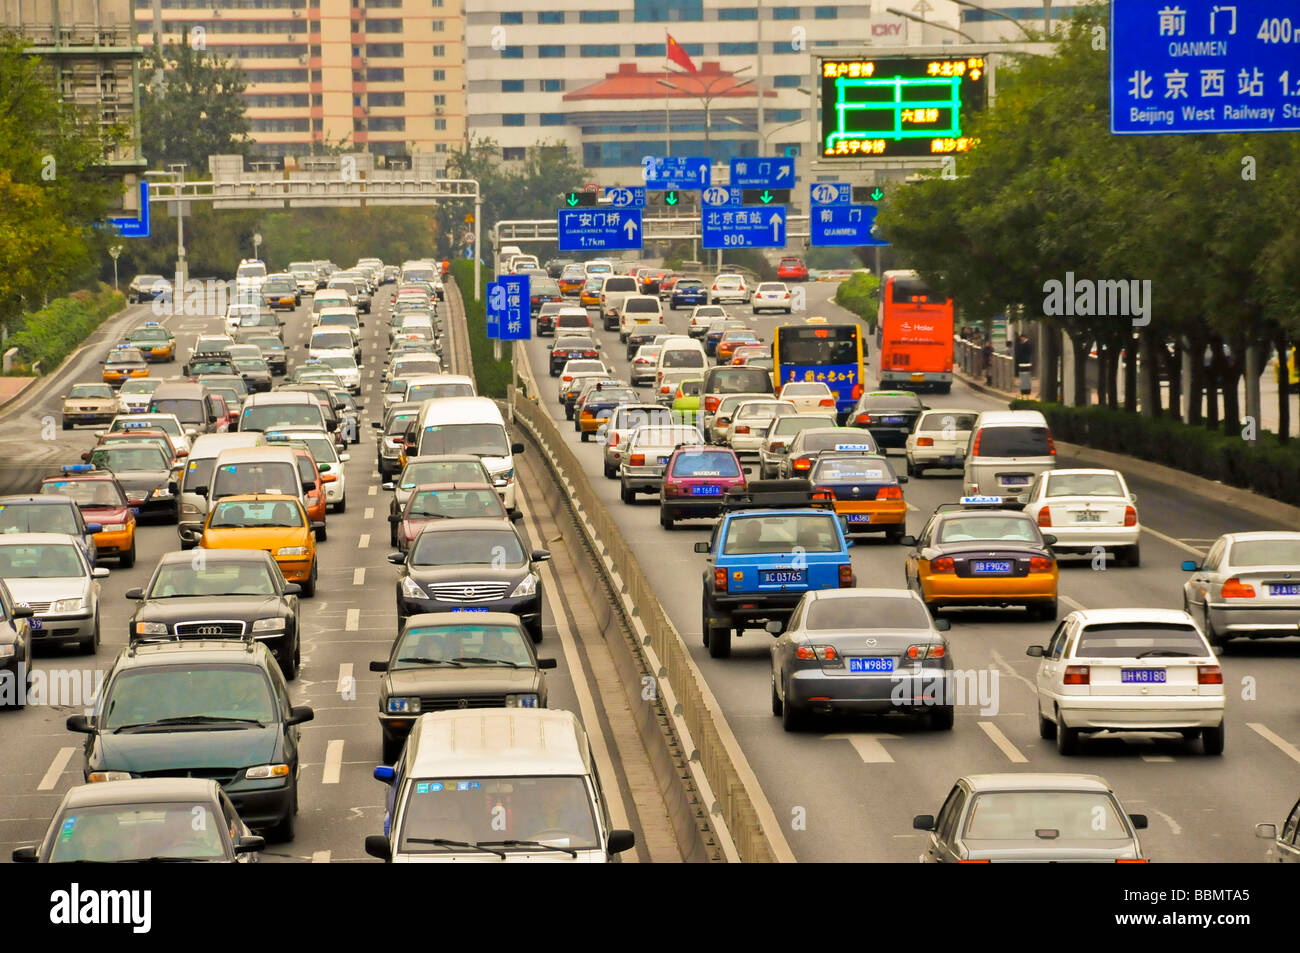 Traffic on highway next to the Forbidden city Beijing China Stock Photo